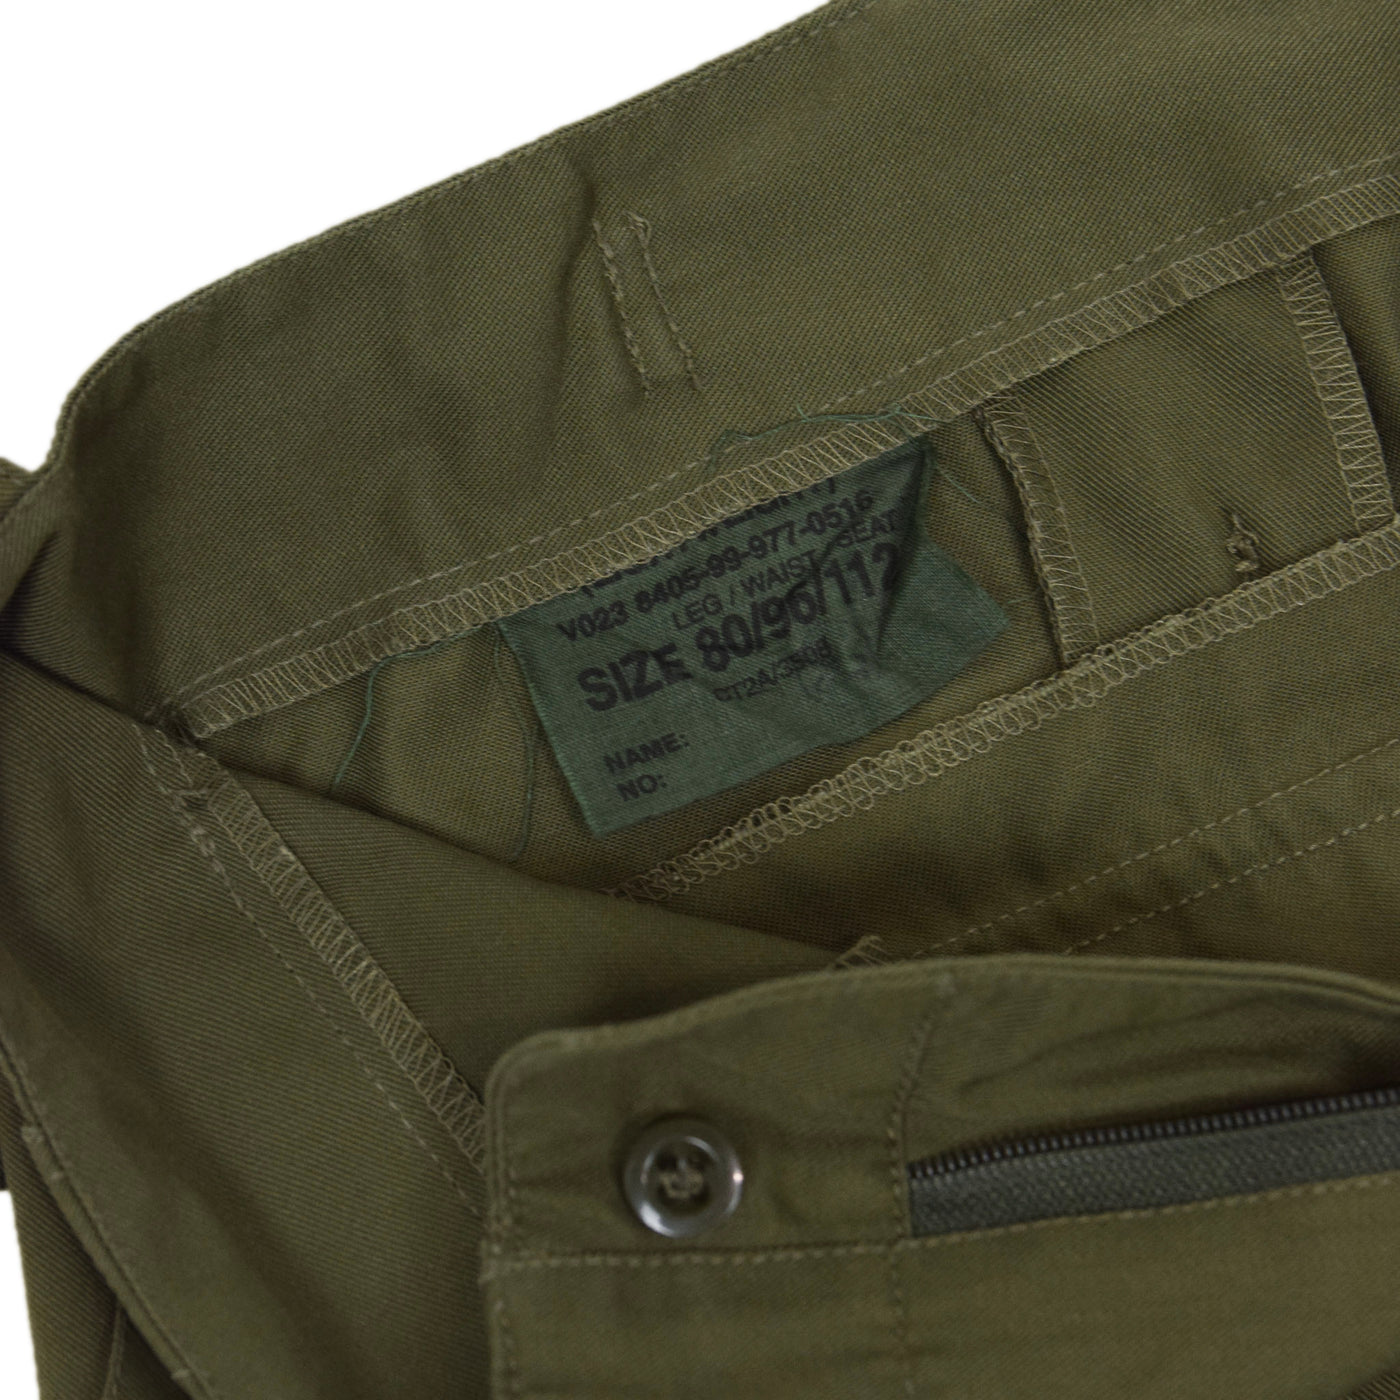 Vintage 90s British Military Lightweight Olive Green Fatigue Trousers 32 - 34 W internal label